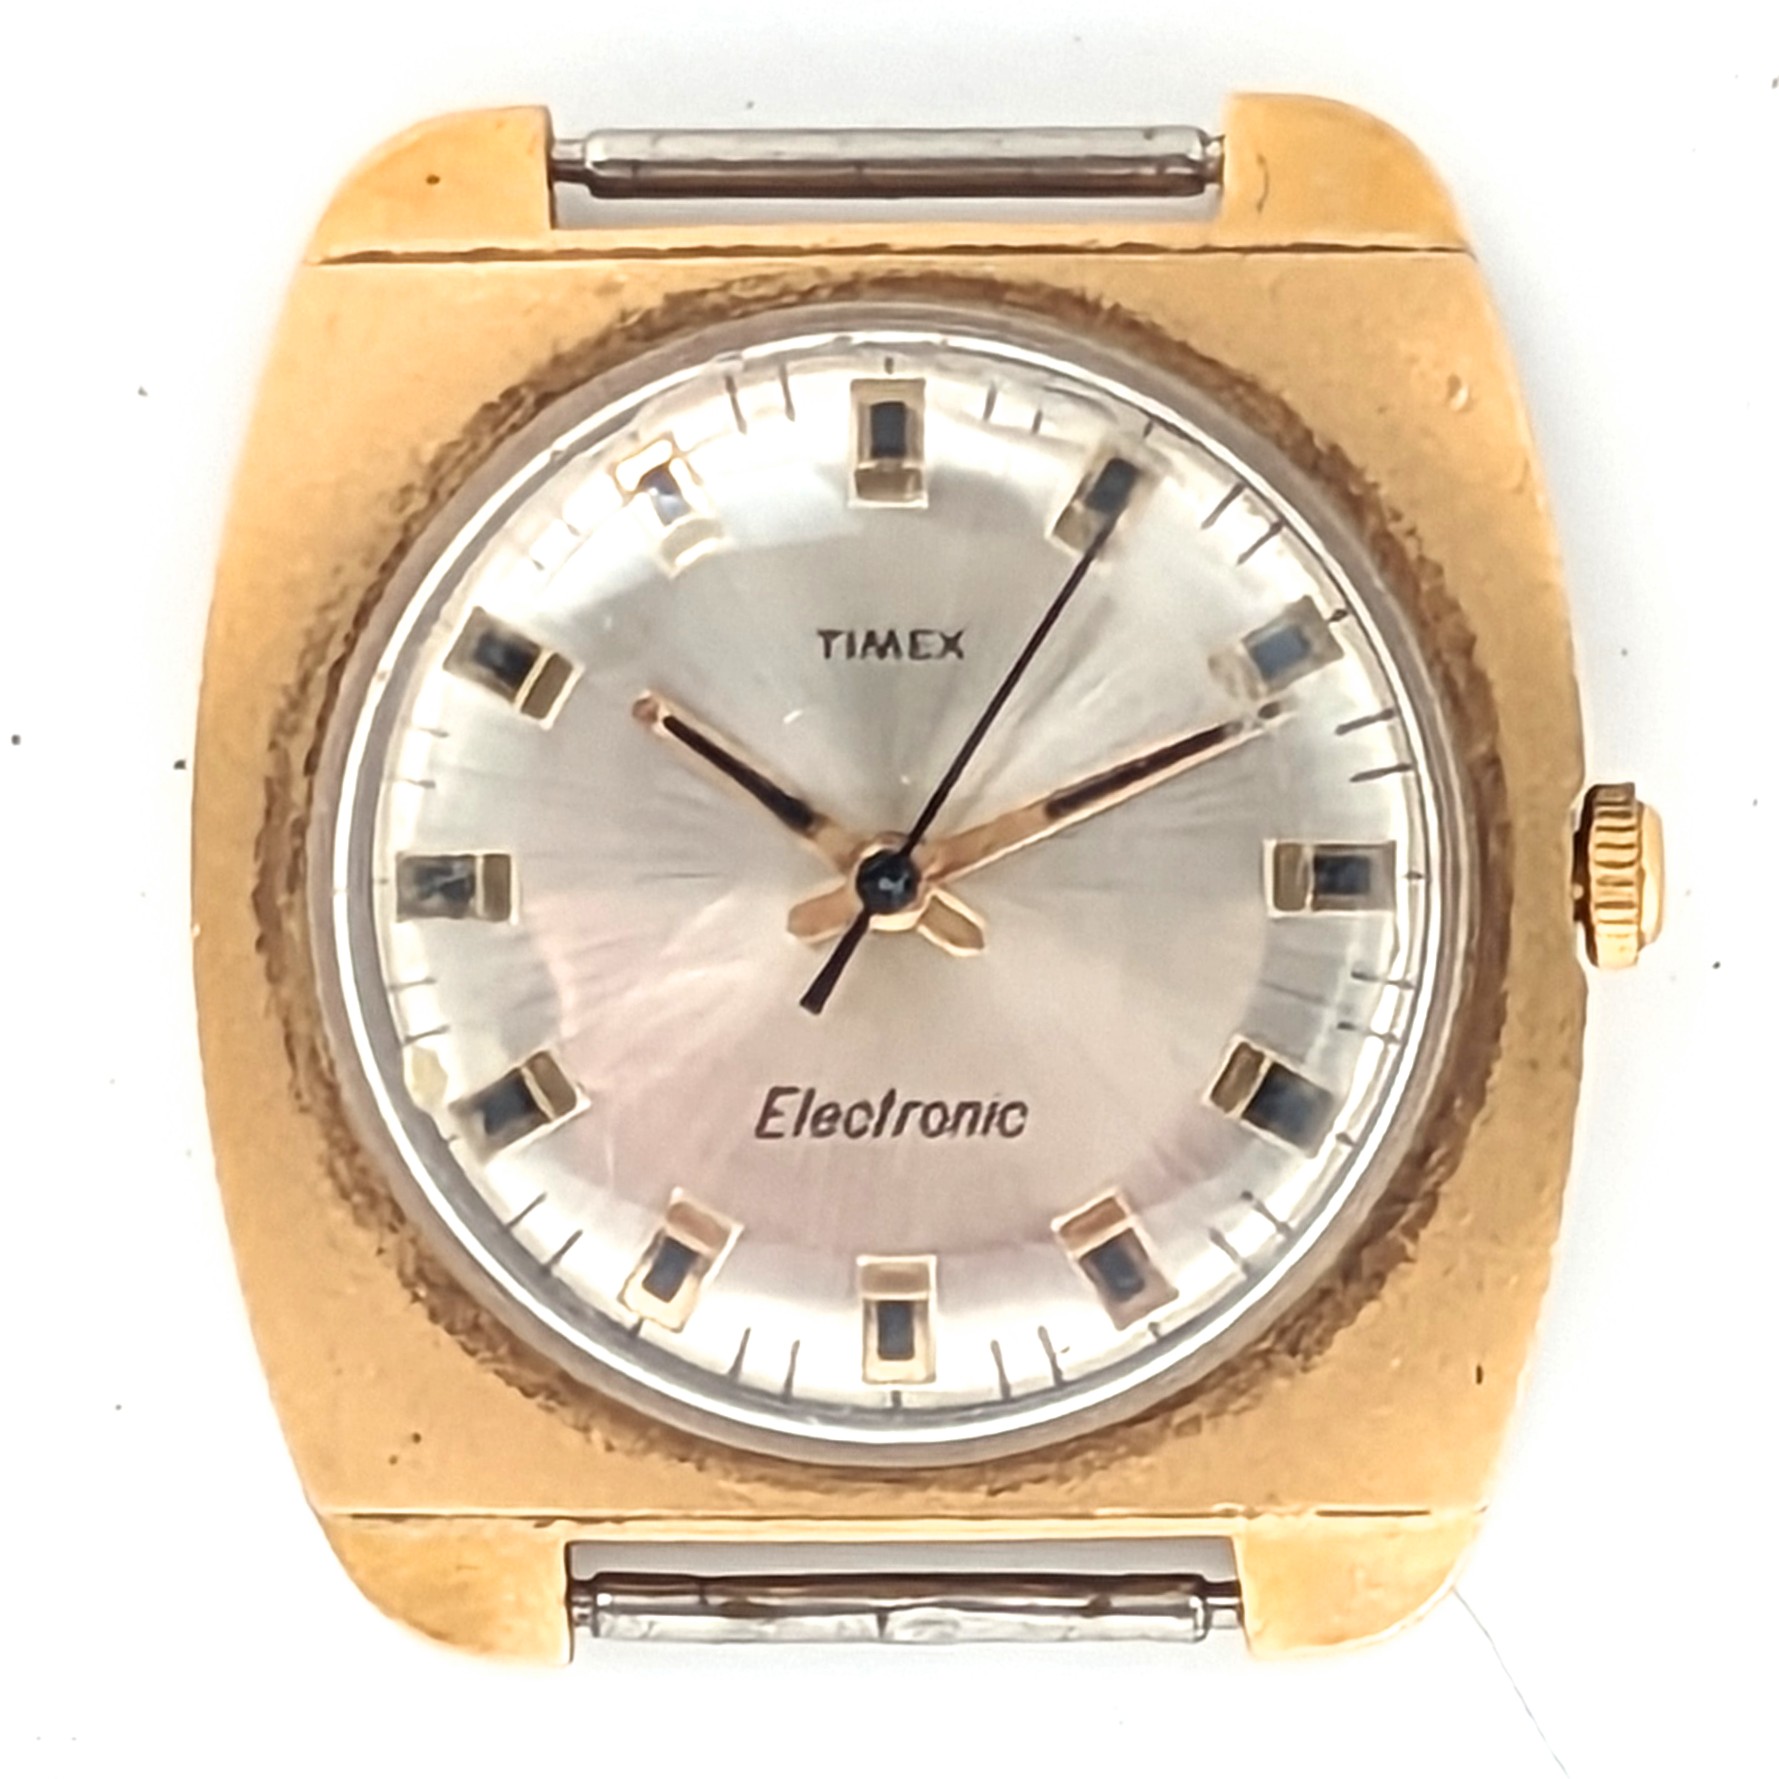 Timex Electronic 76360 5073 [1973]